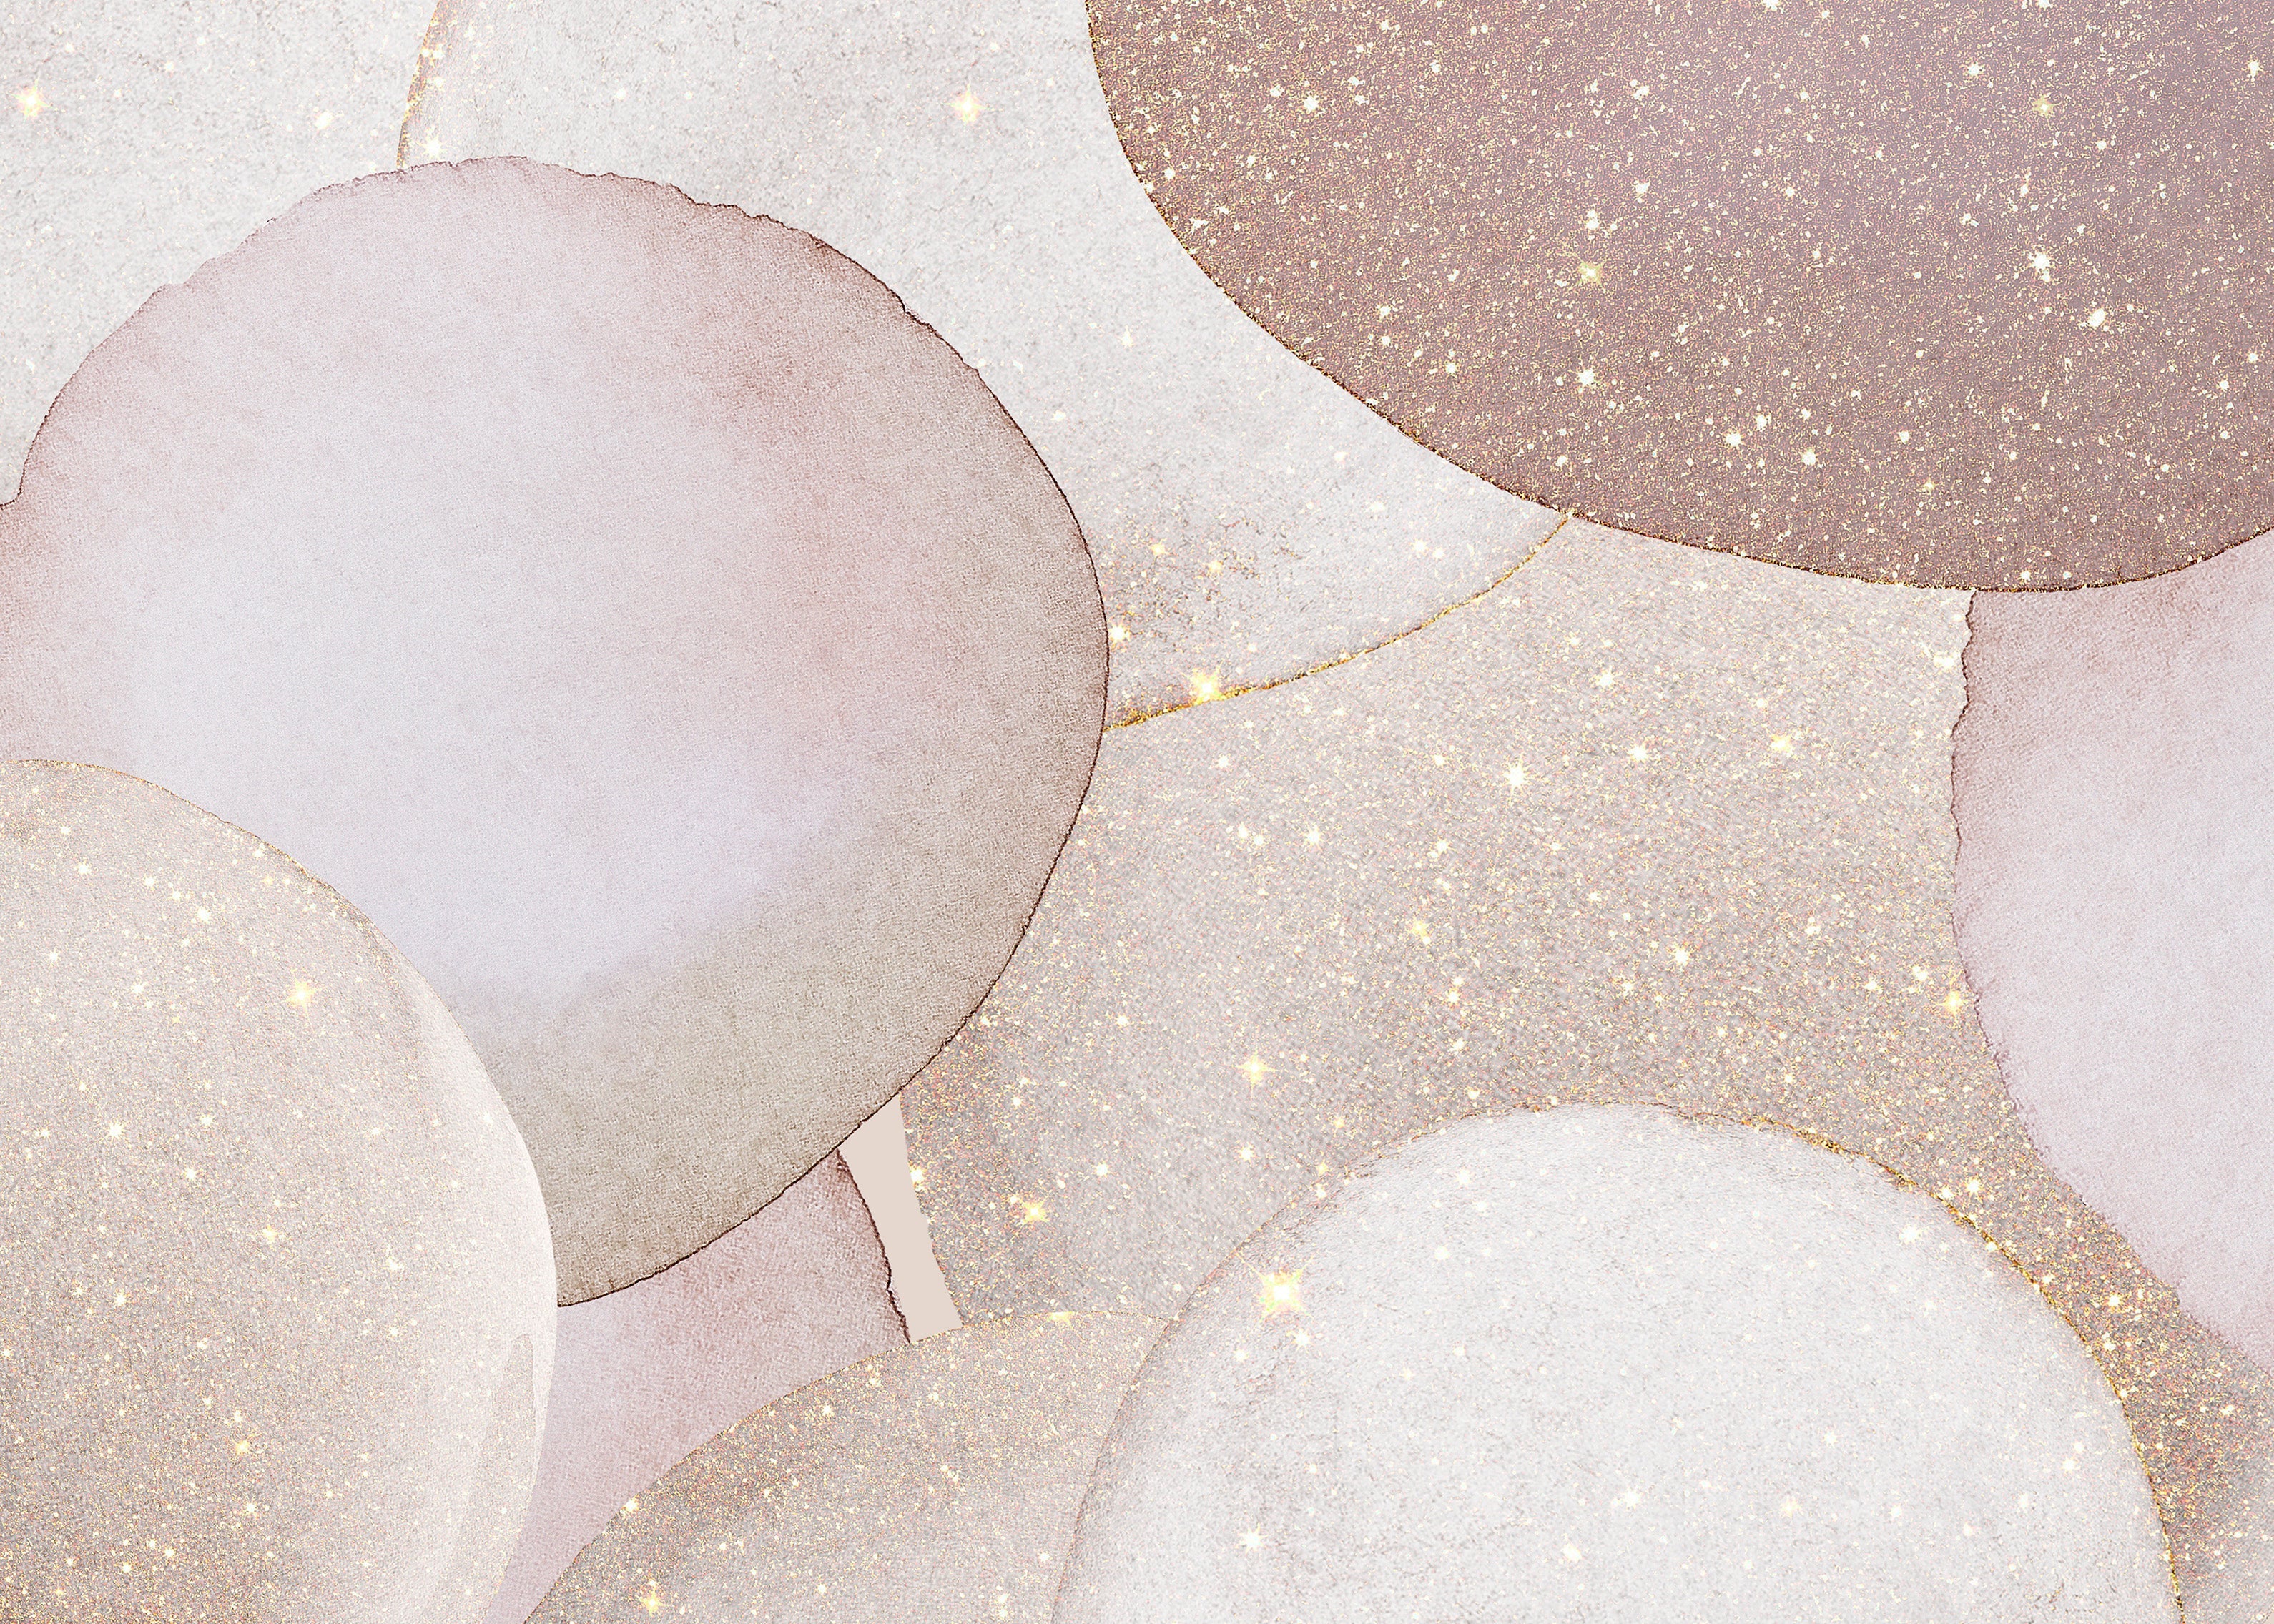 Close-up view of the Luxury Watercolor Wall Mural Wallpaper featuring overlapping abstract watercolor shapes in pink, beige, and gold tones with glittering accents